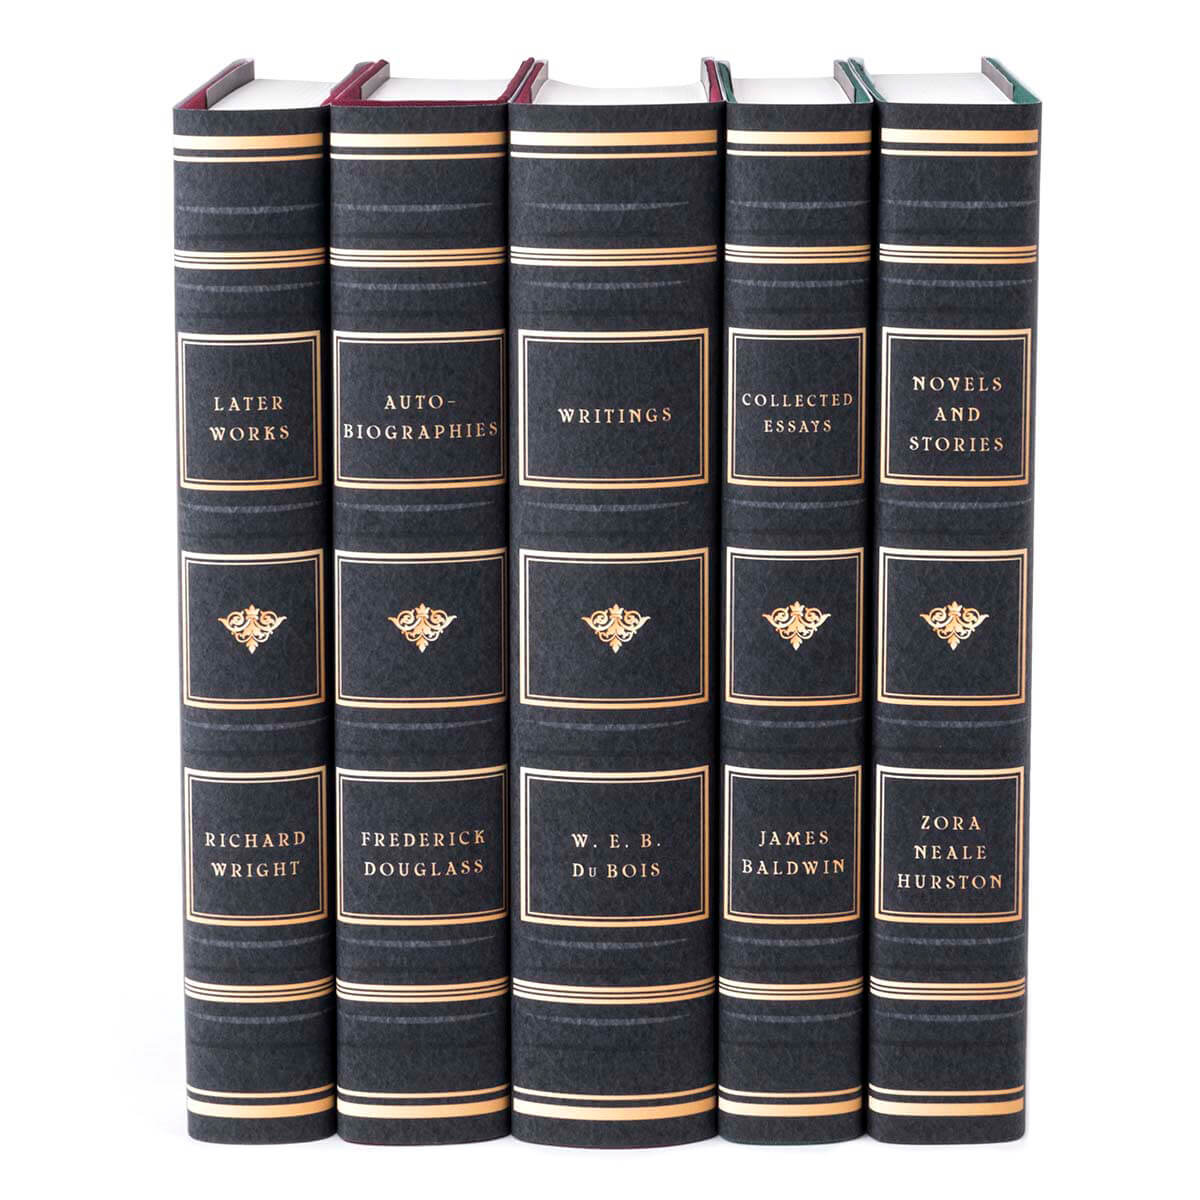 BEAUTIFUL BOOK SETS THAT DOUBLE AS DECOR